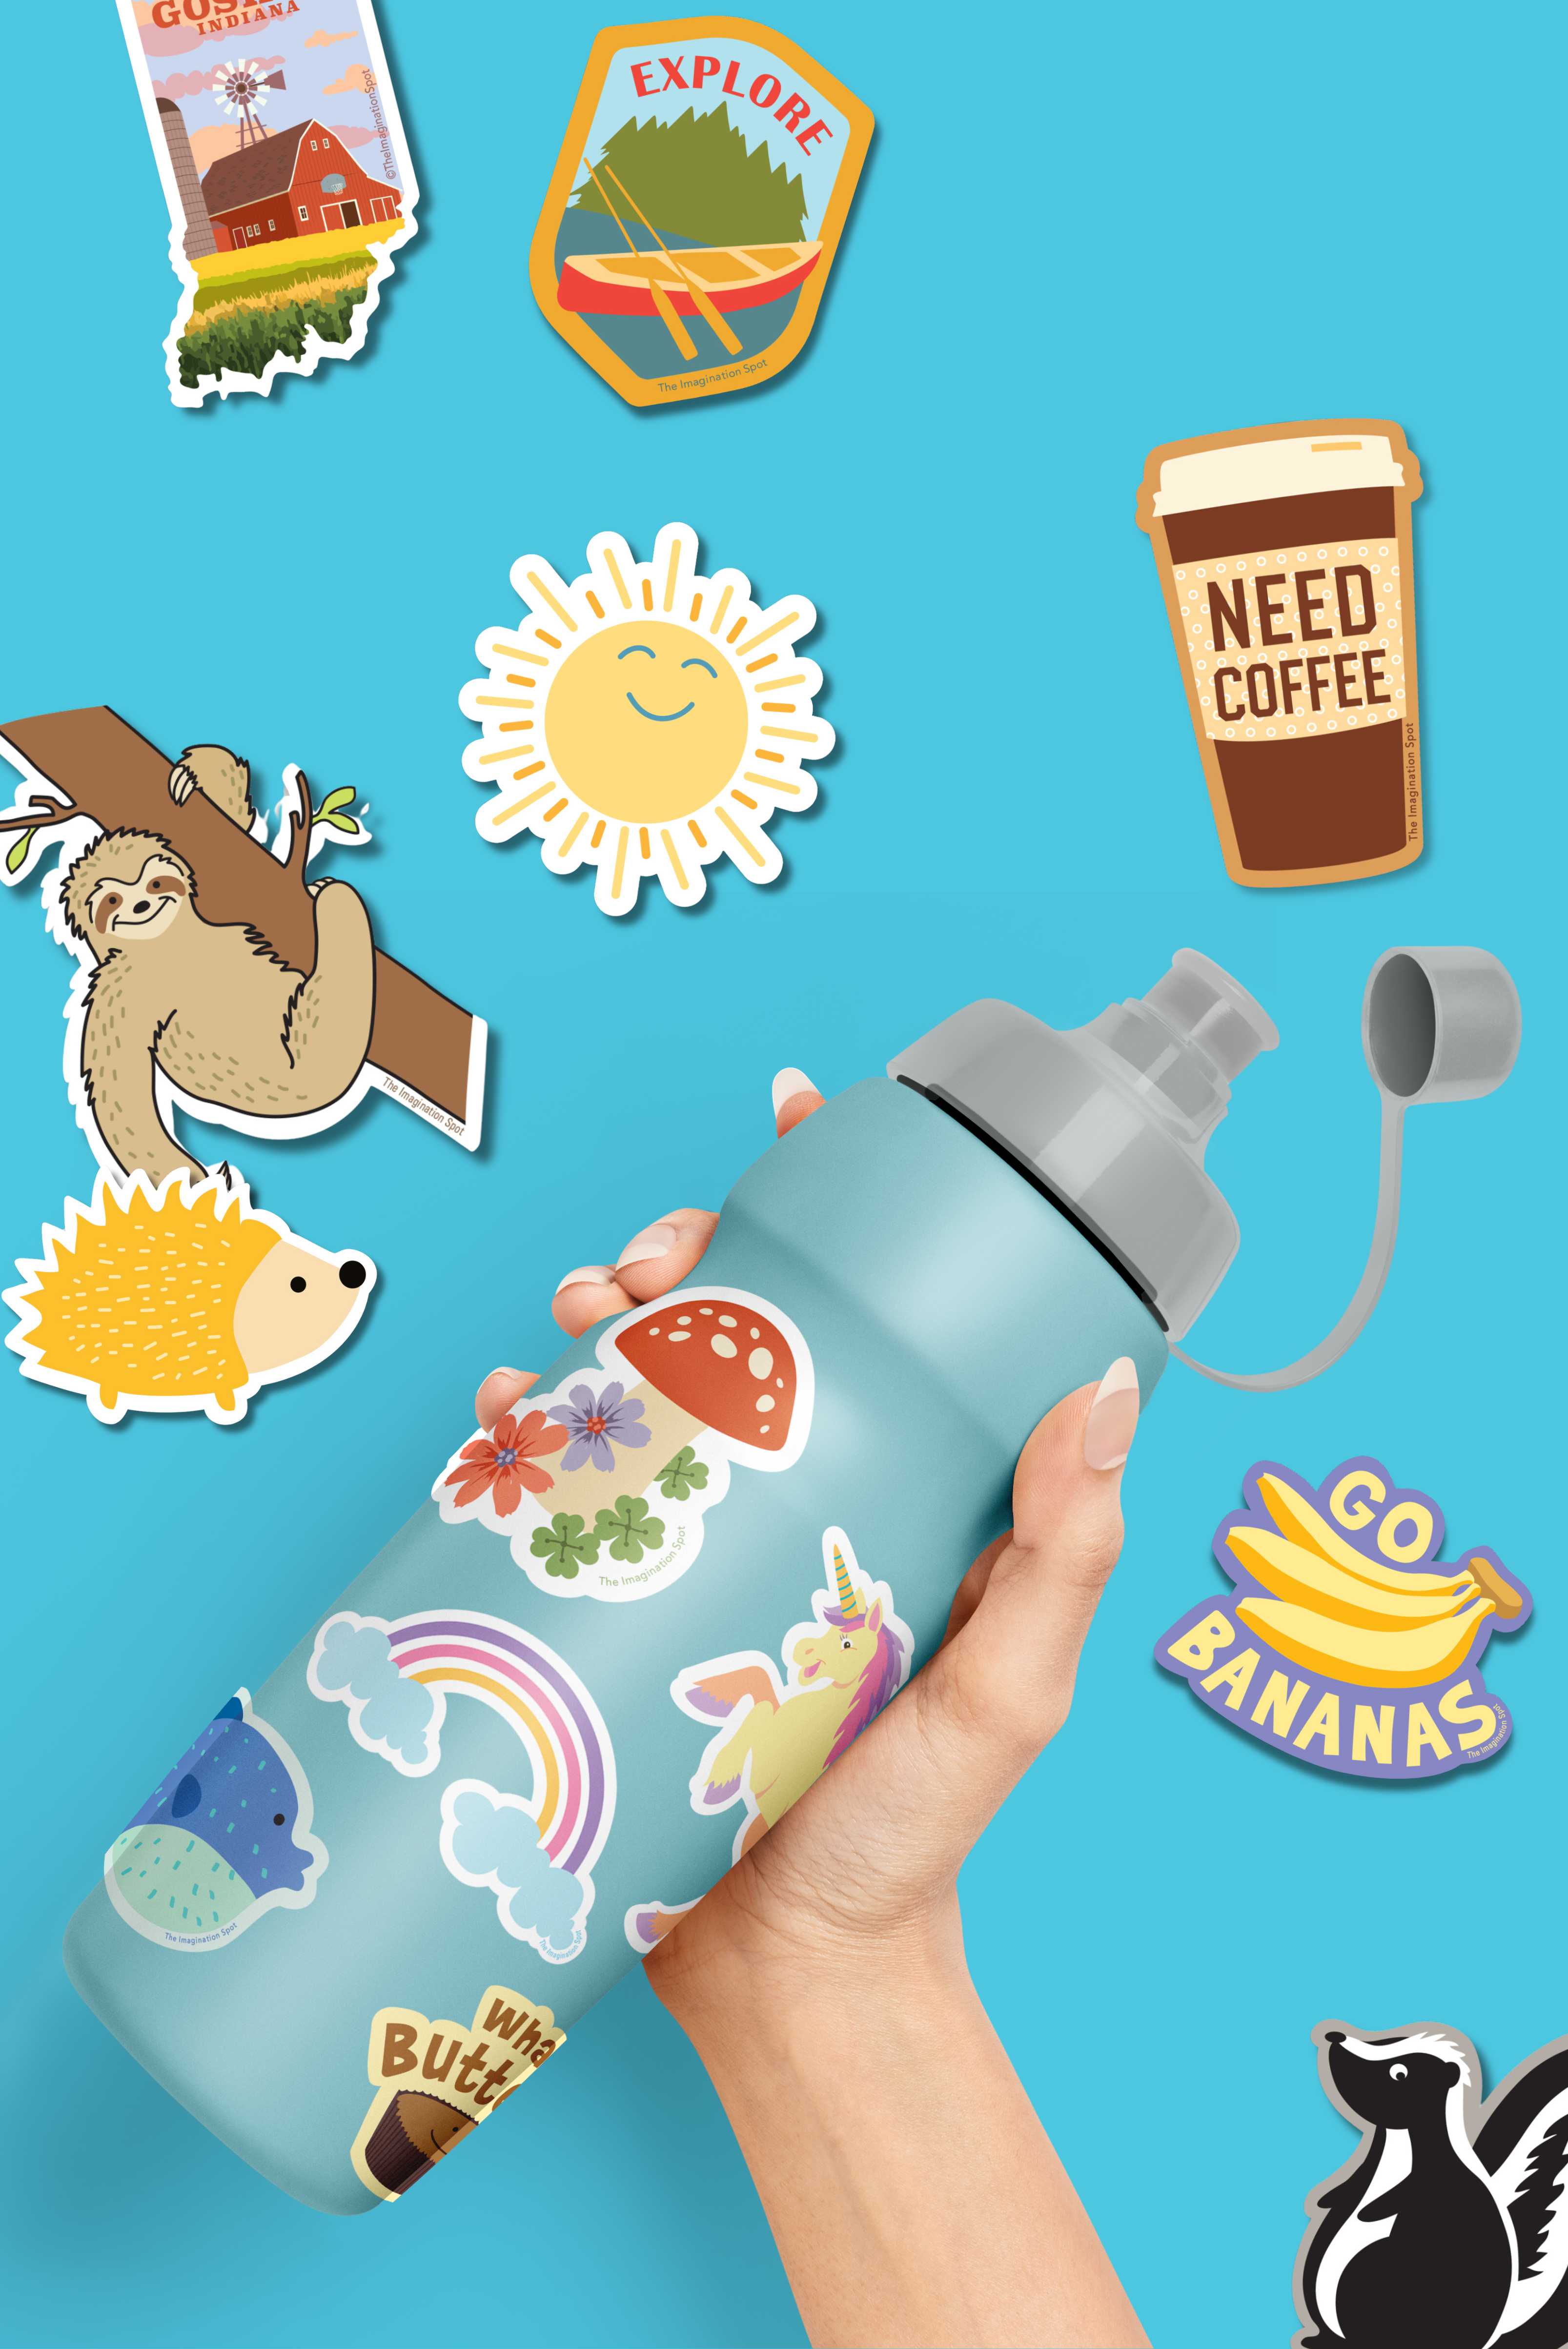 Vinyl stickers - The Imagination Spot - stickers for water bottles, laptops and more